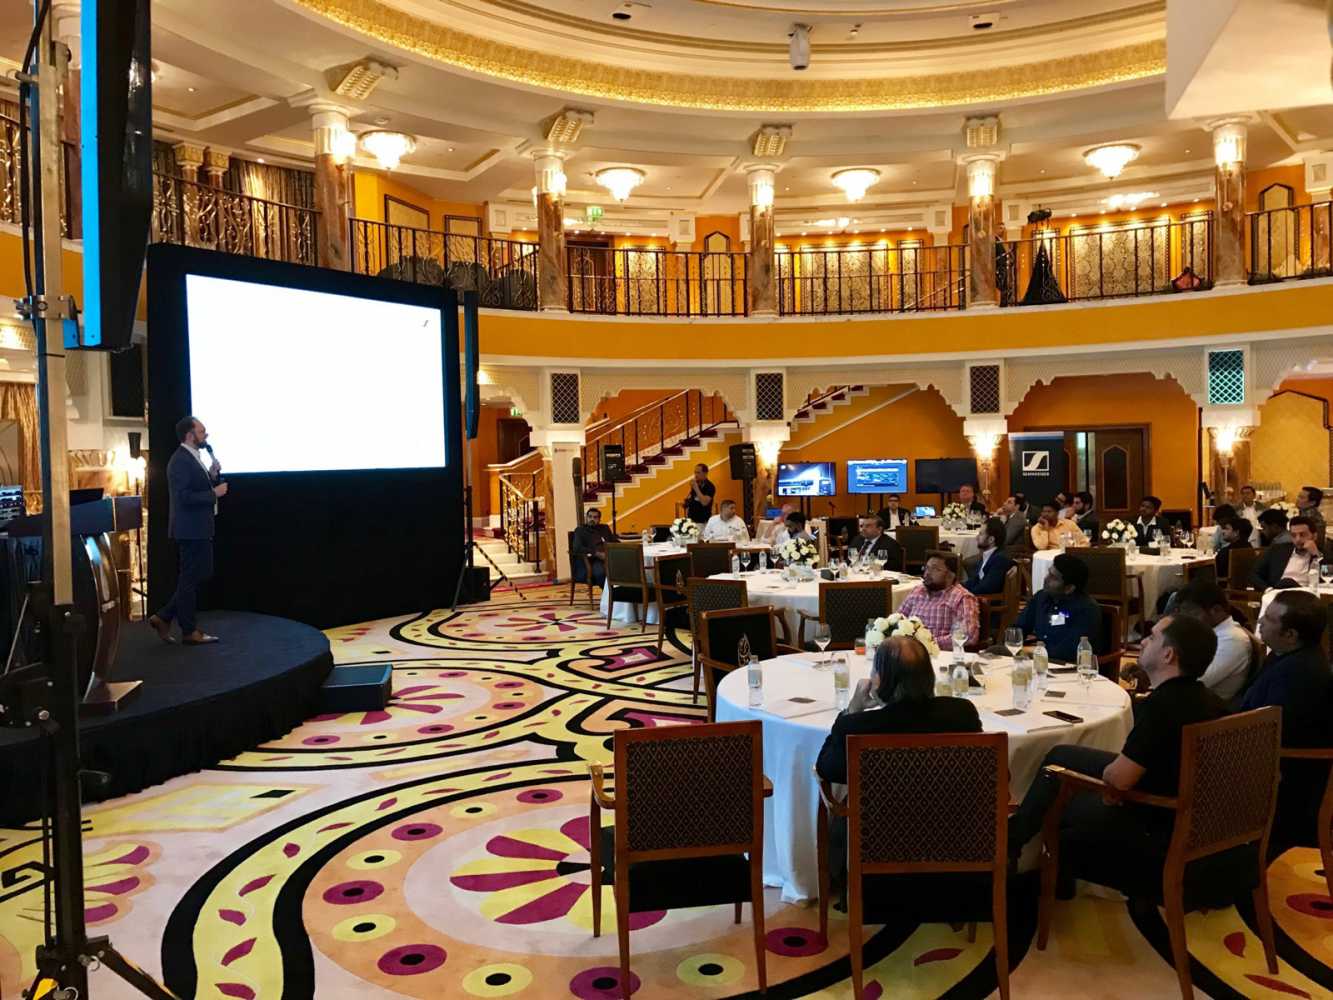 The event in Dubai was attended by over 60 industry professionals